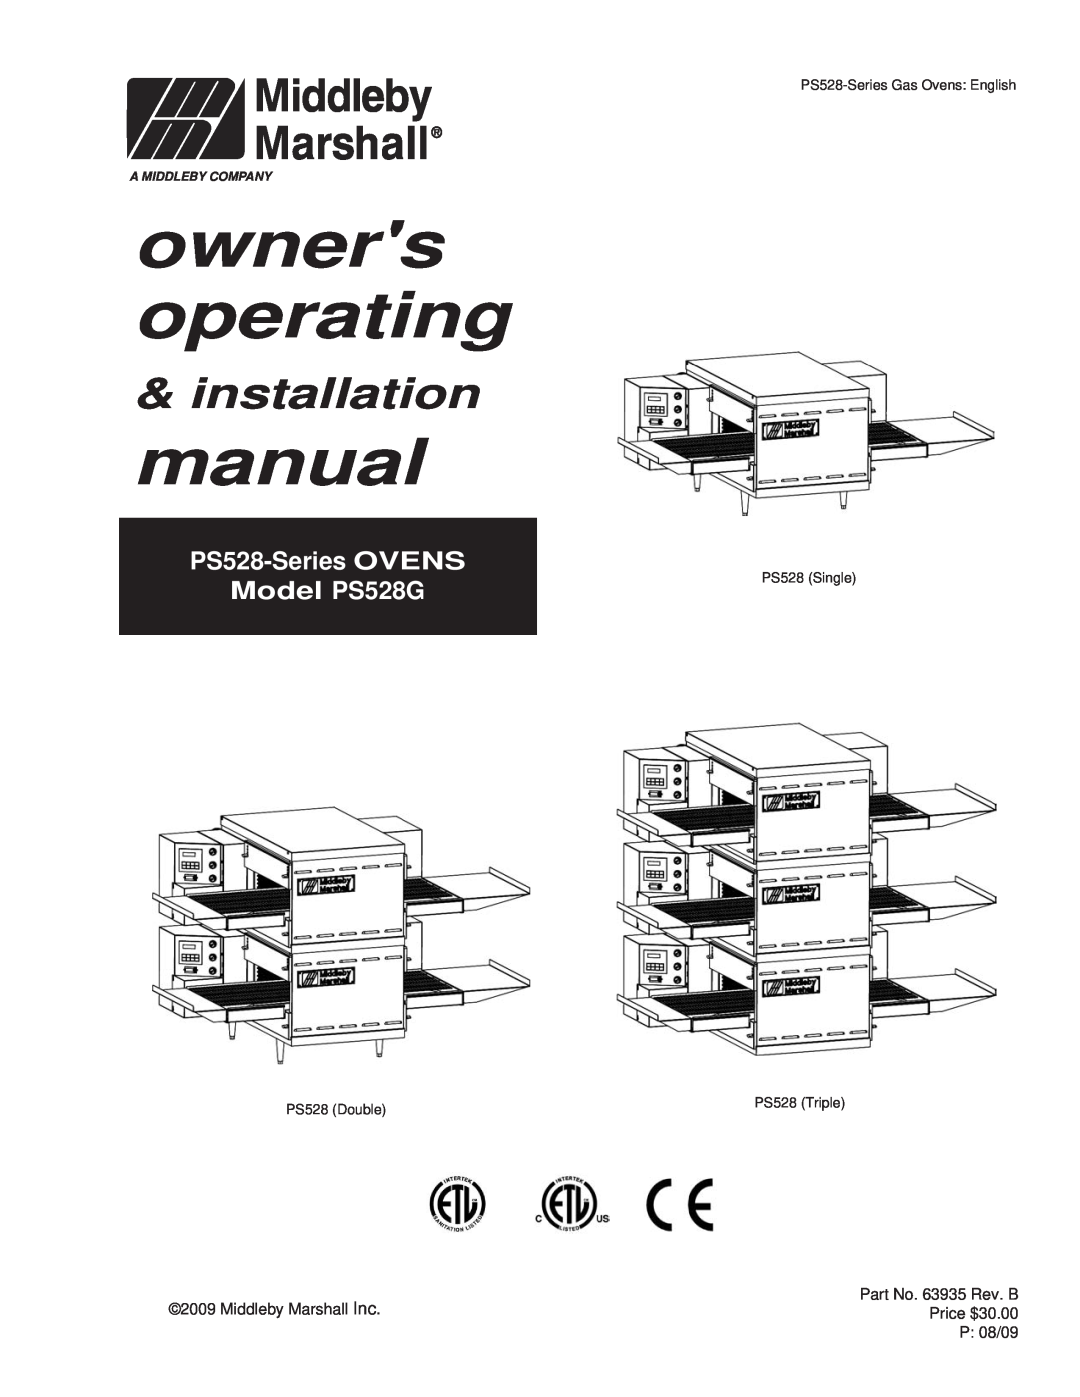 Middleby Marshall installation manual owners operating, PS528-SeriesOVENS Model PS528G, Part No. 63935 Rev. C 